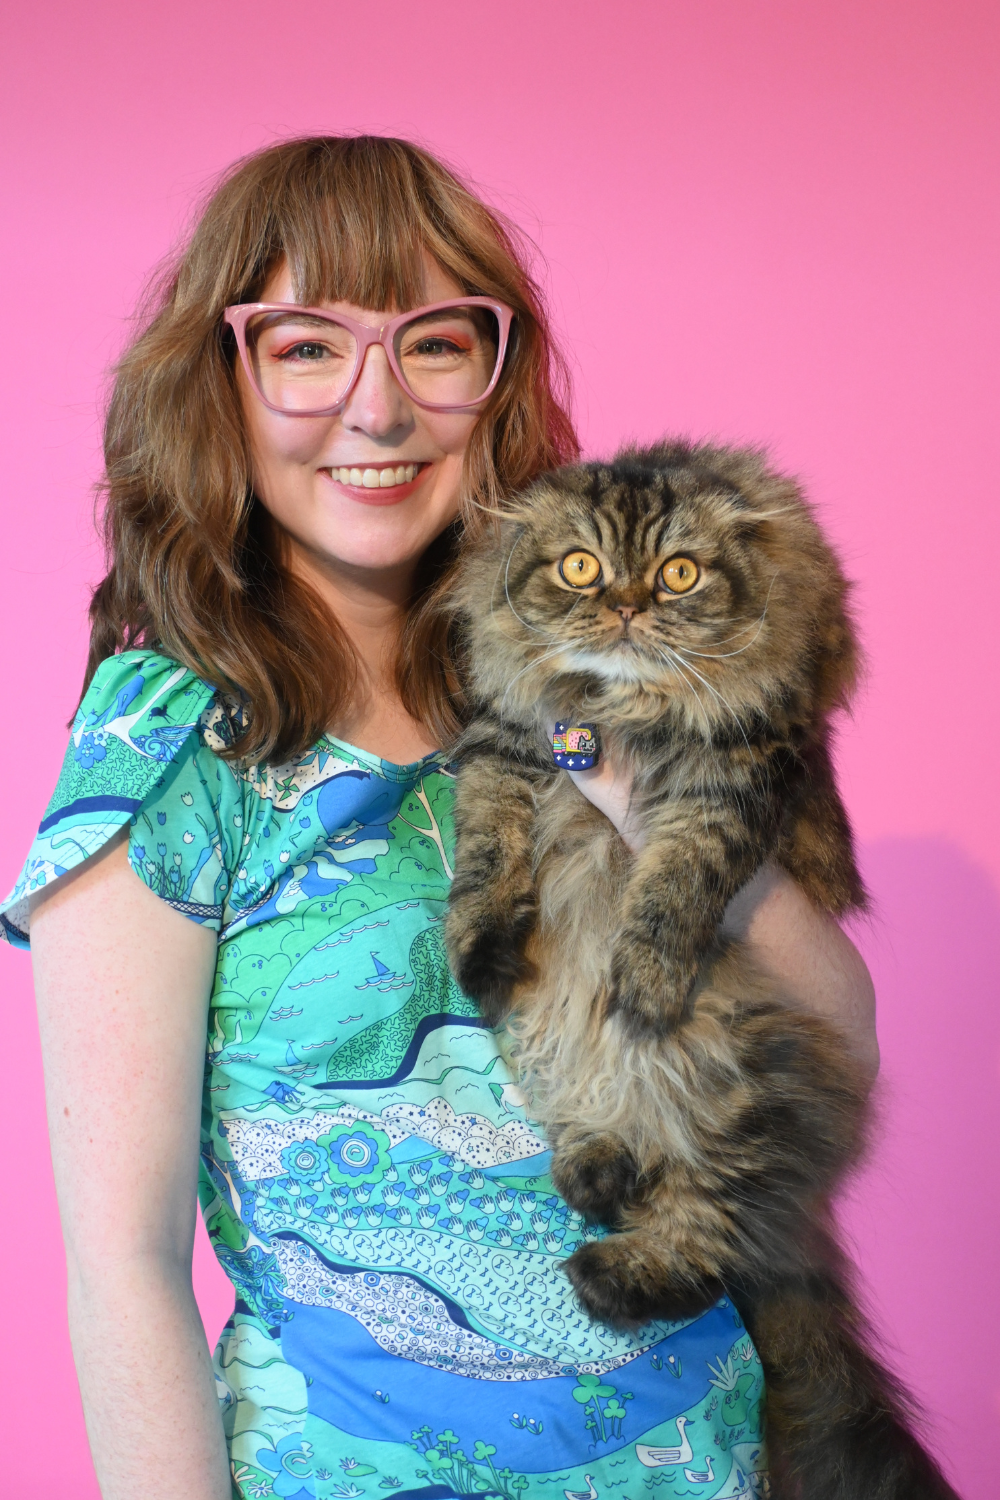 Model with glasses holding cat wearing shirt with landscape graphic in green and blue